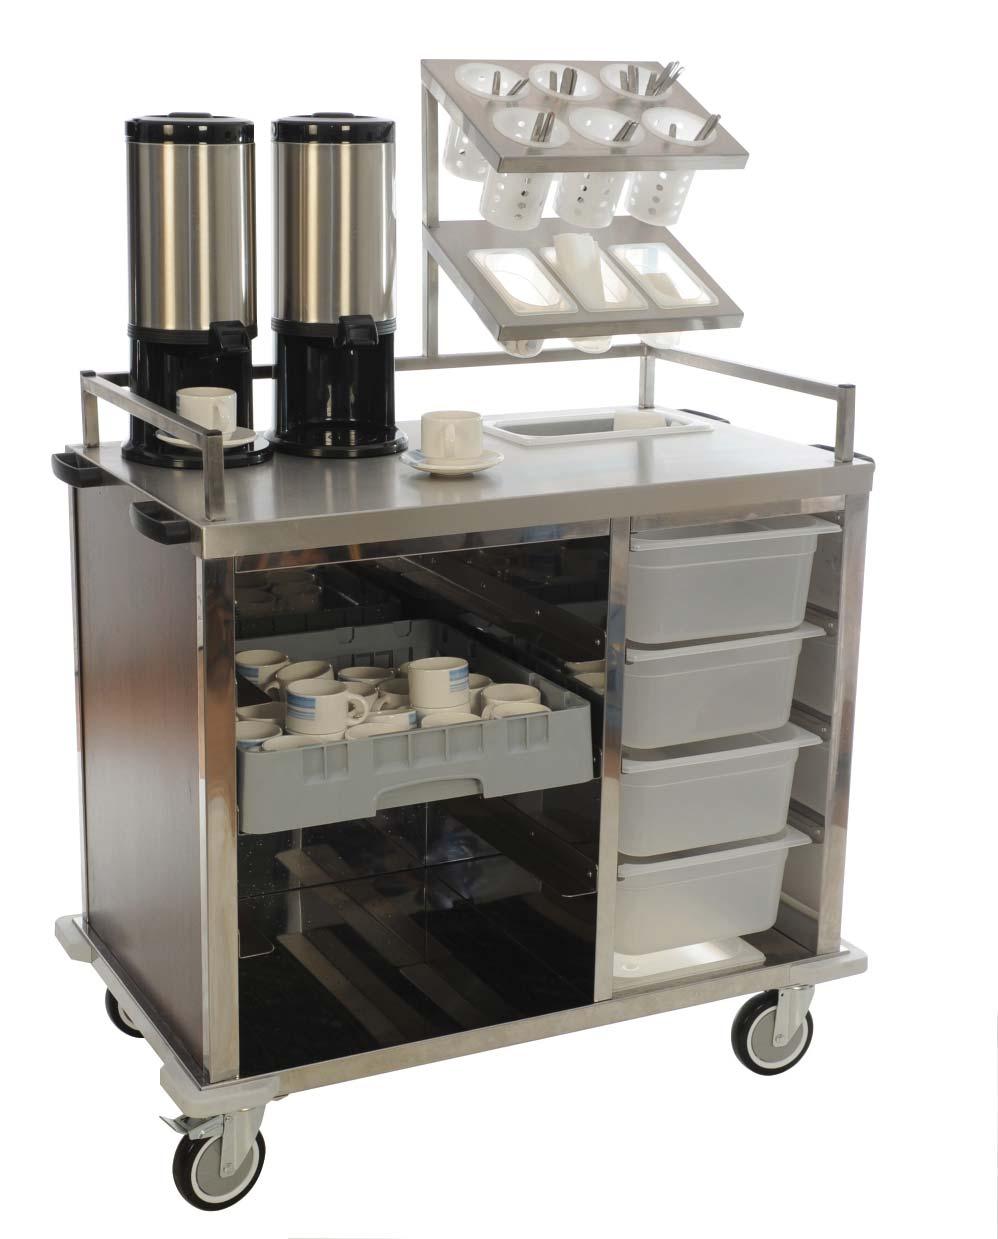 22 BEVERAGE TROLLEY An attractive and easy to manoeuvre stainless steel trolley provides space for everything required for tea & coffee service.